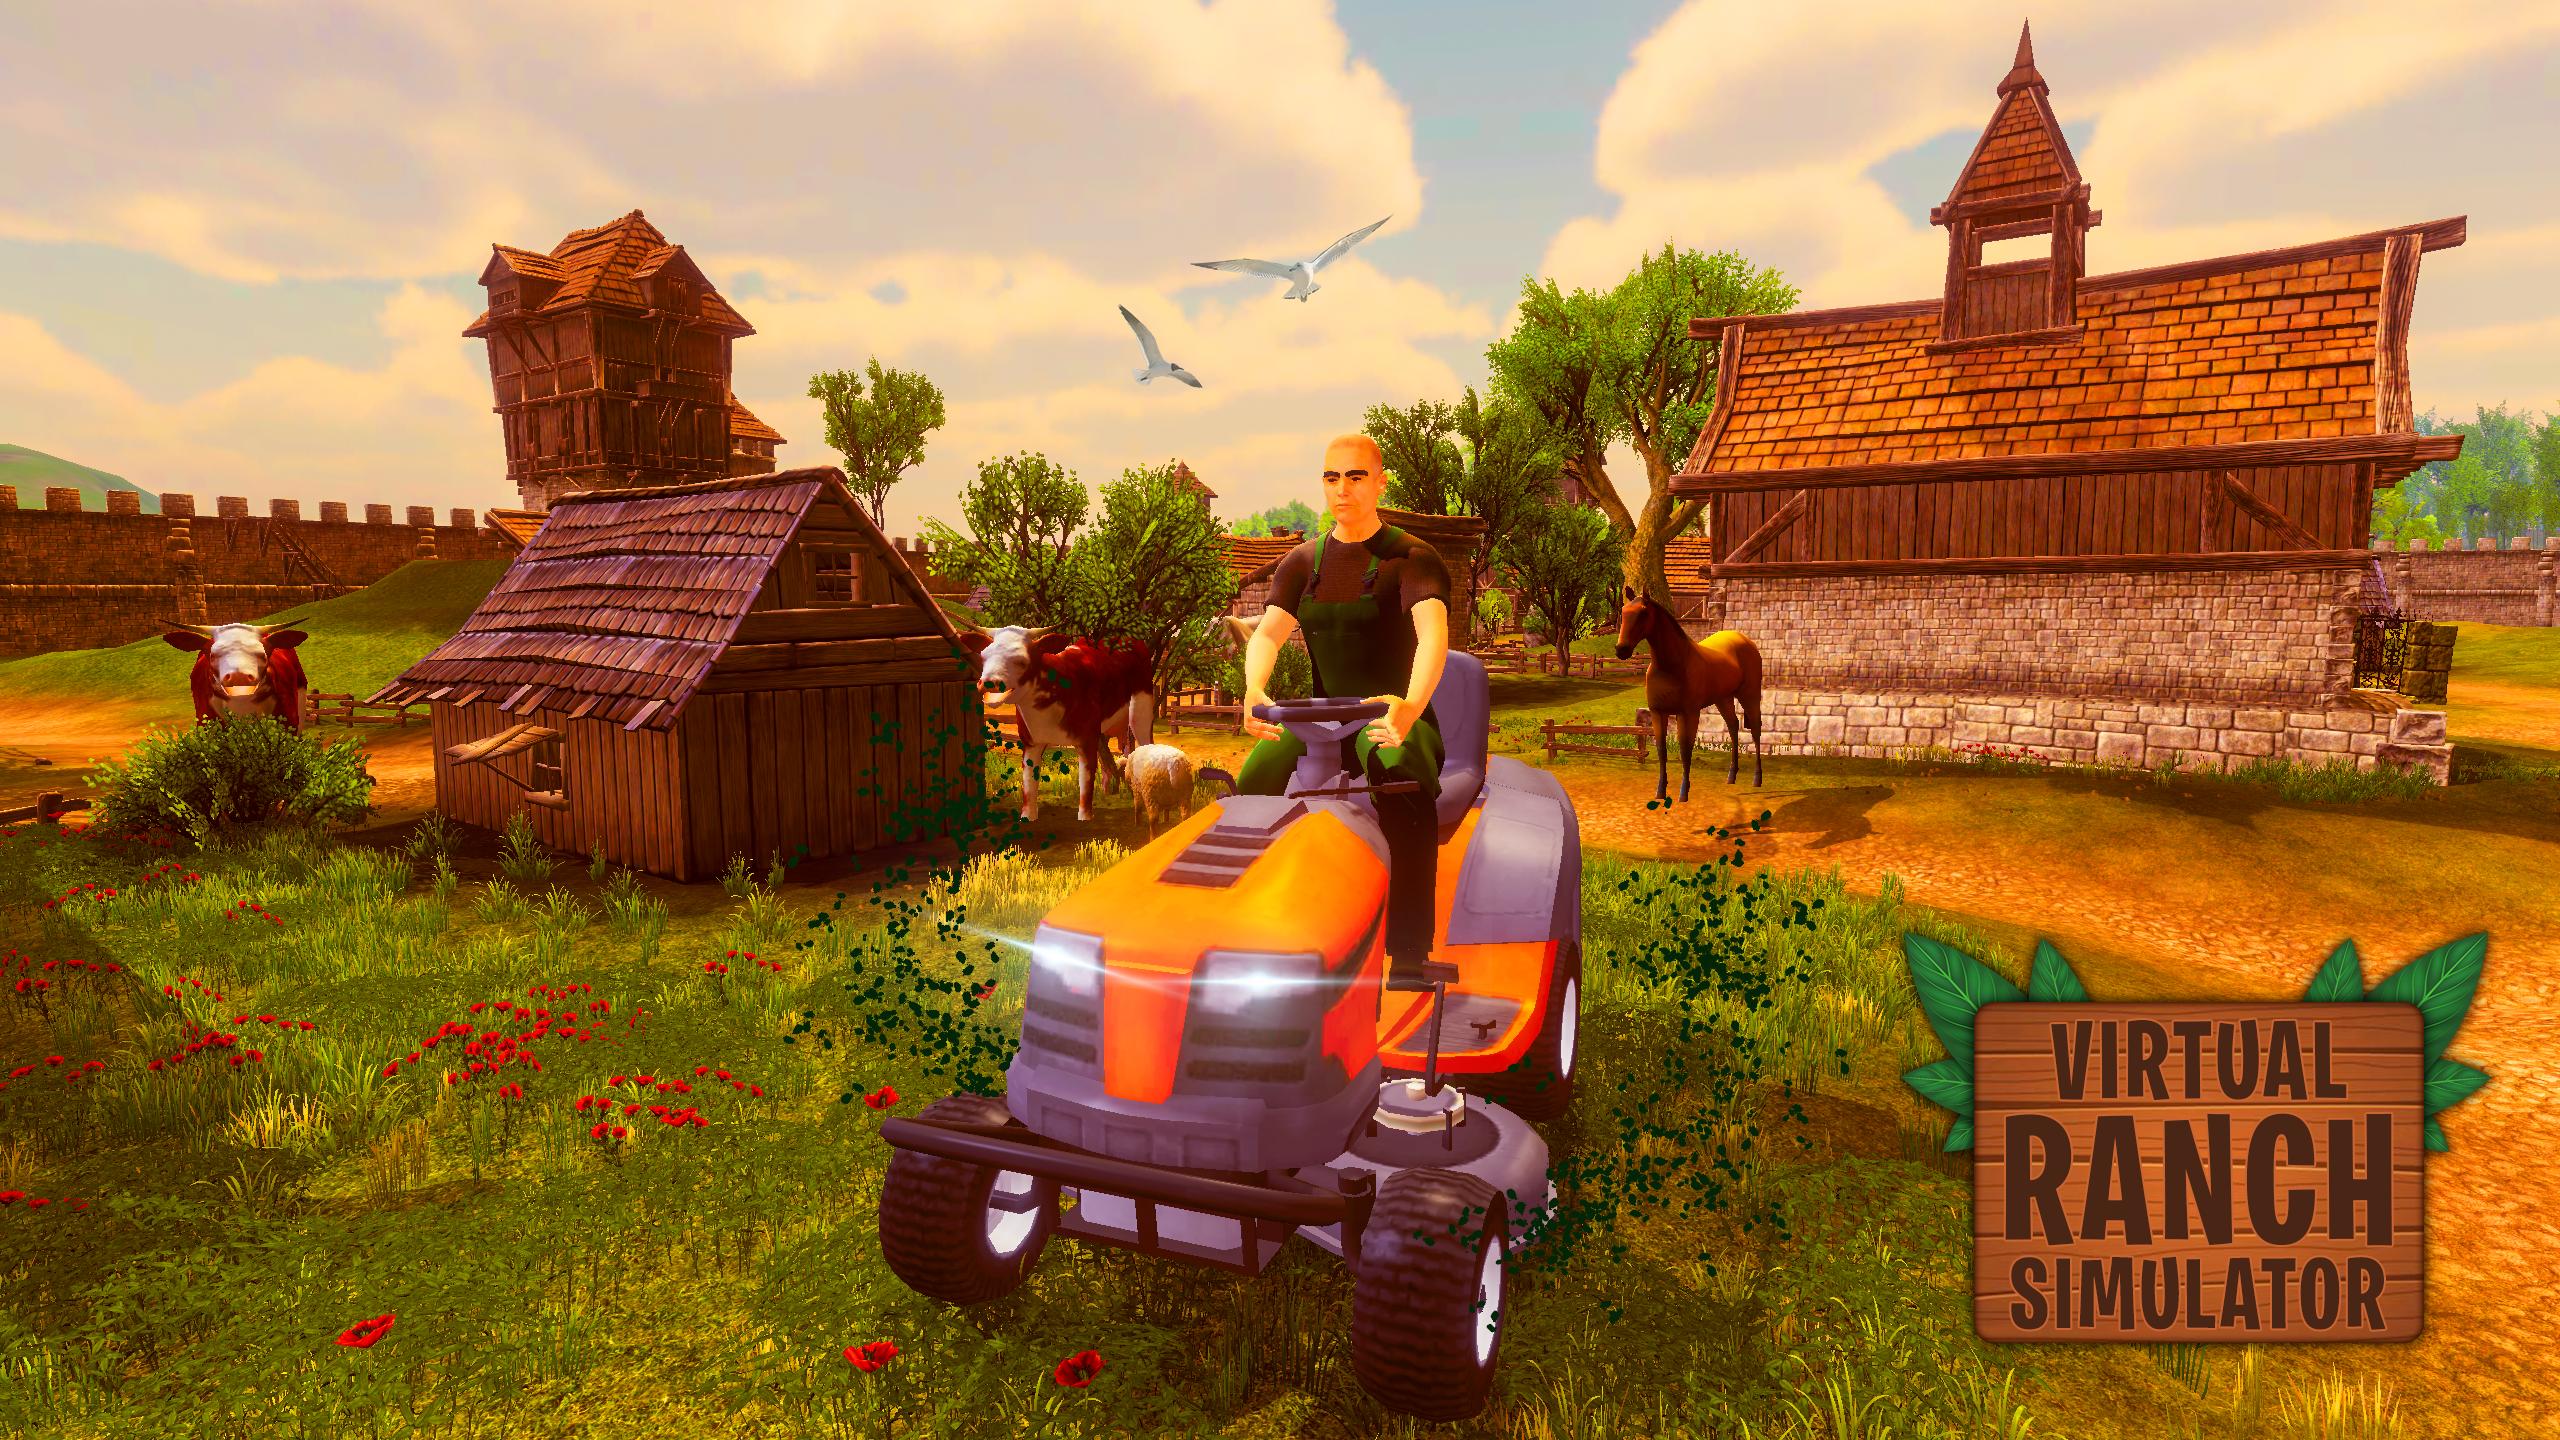 Download Ranch Simulator Walkthrough: Play All Levels android on PC